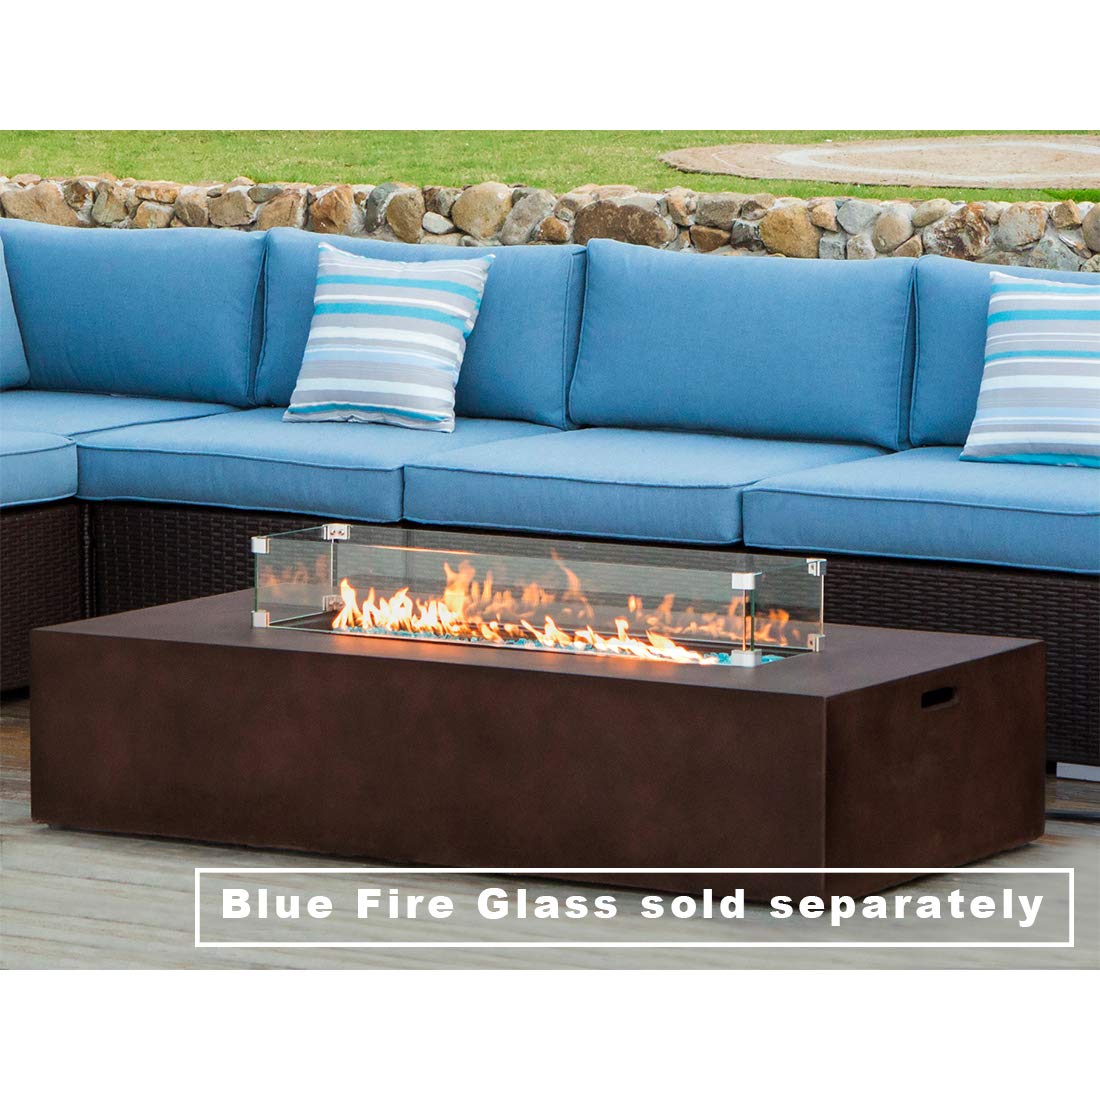 COSIEST Outdoor Propane Fire Pit Table 56-inch x 28-inch Rectangle Bronze Compact Concrete-Like Finish, 50,000 BTU,Wind Guard, Tank Outside, Free Lava Rocks, Fits 20lb Tank Outside, Raincover